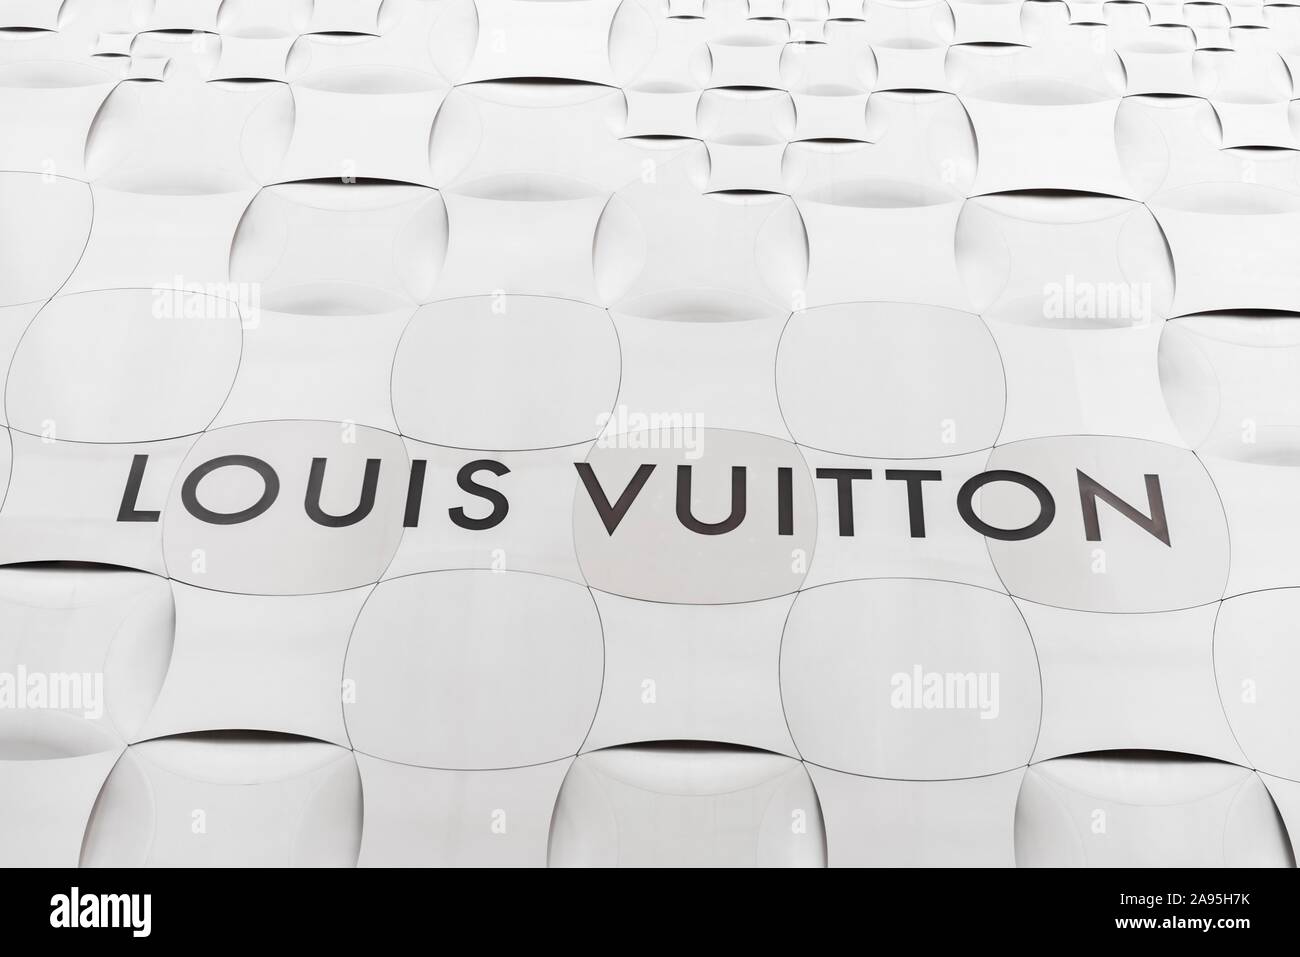 Lv Black and White Stock Photos & Images - Alamy